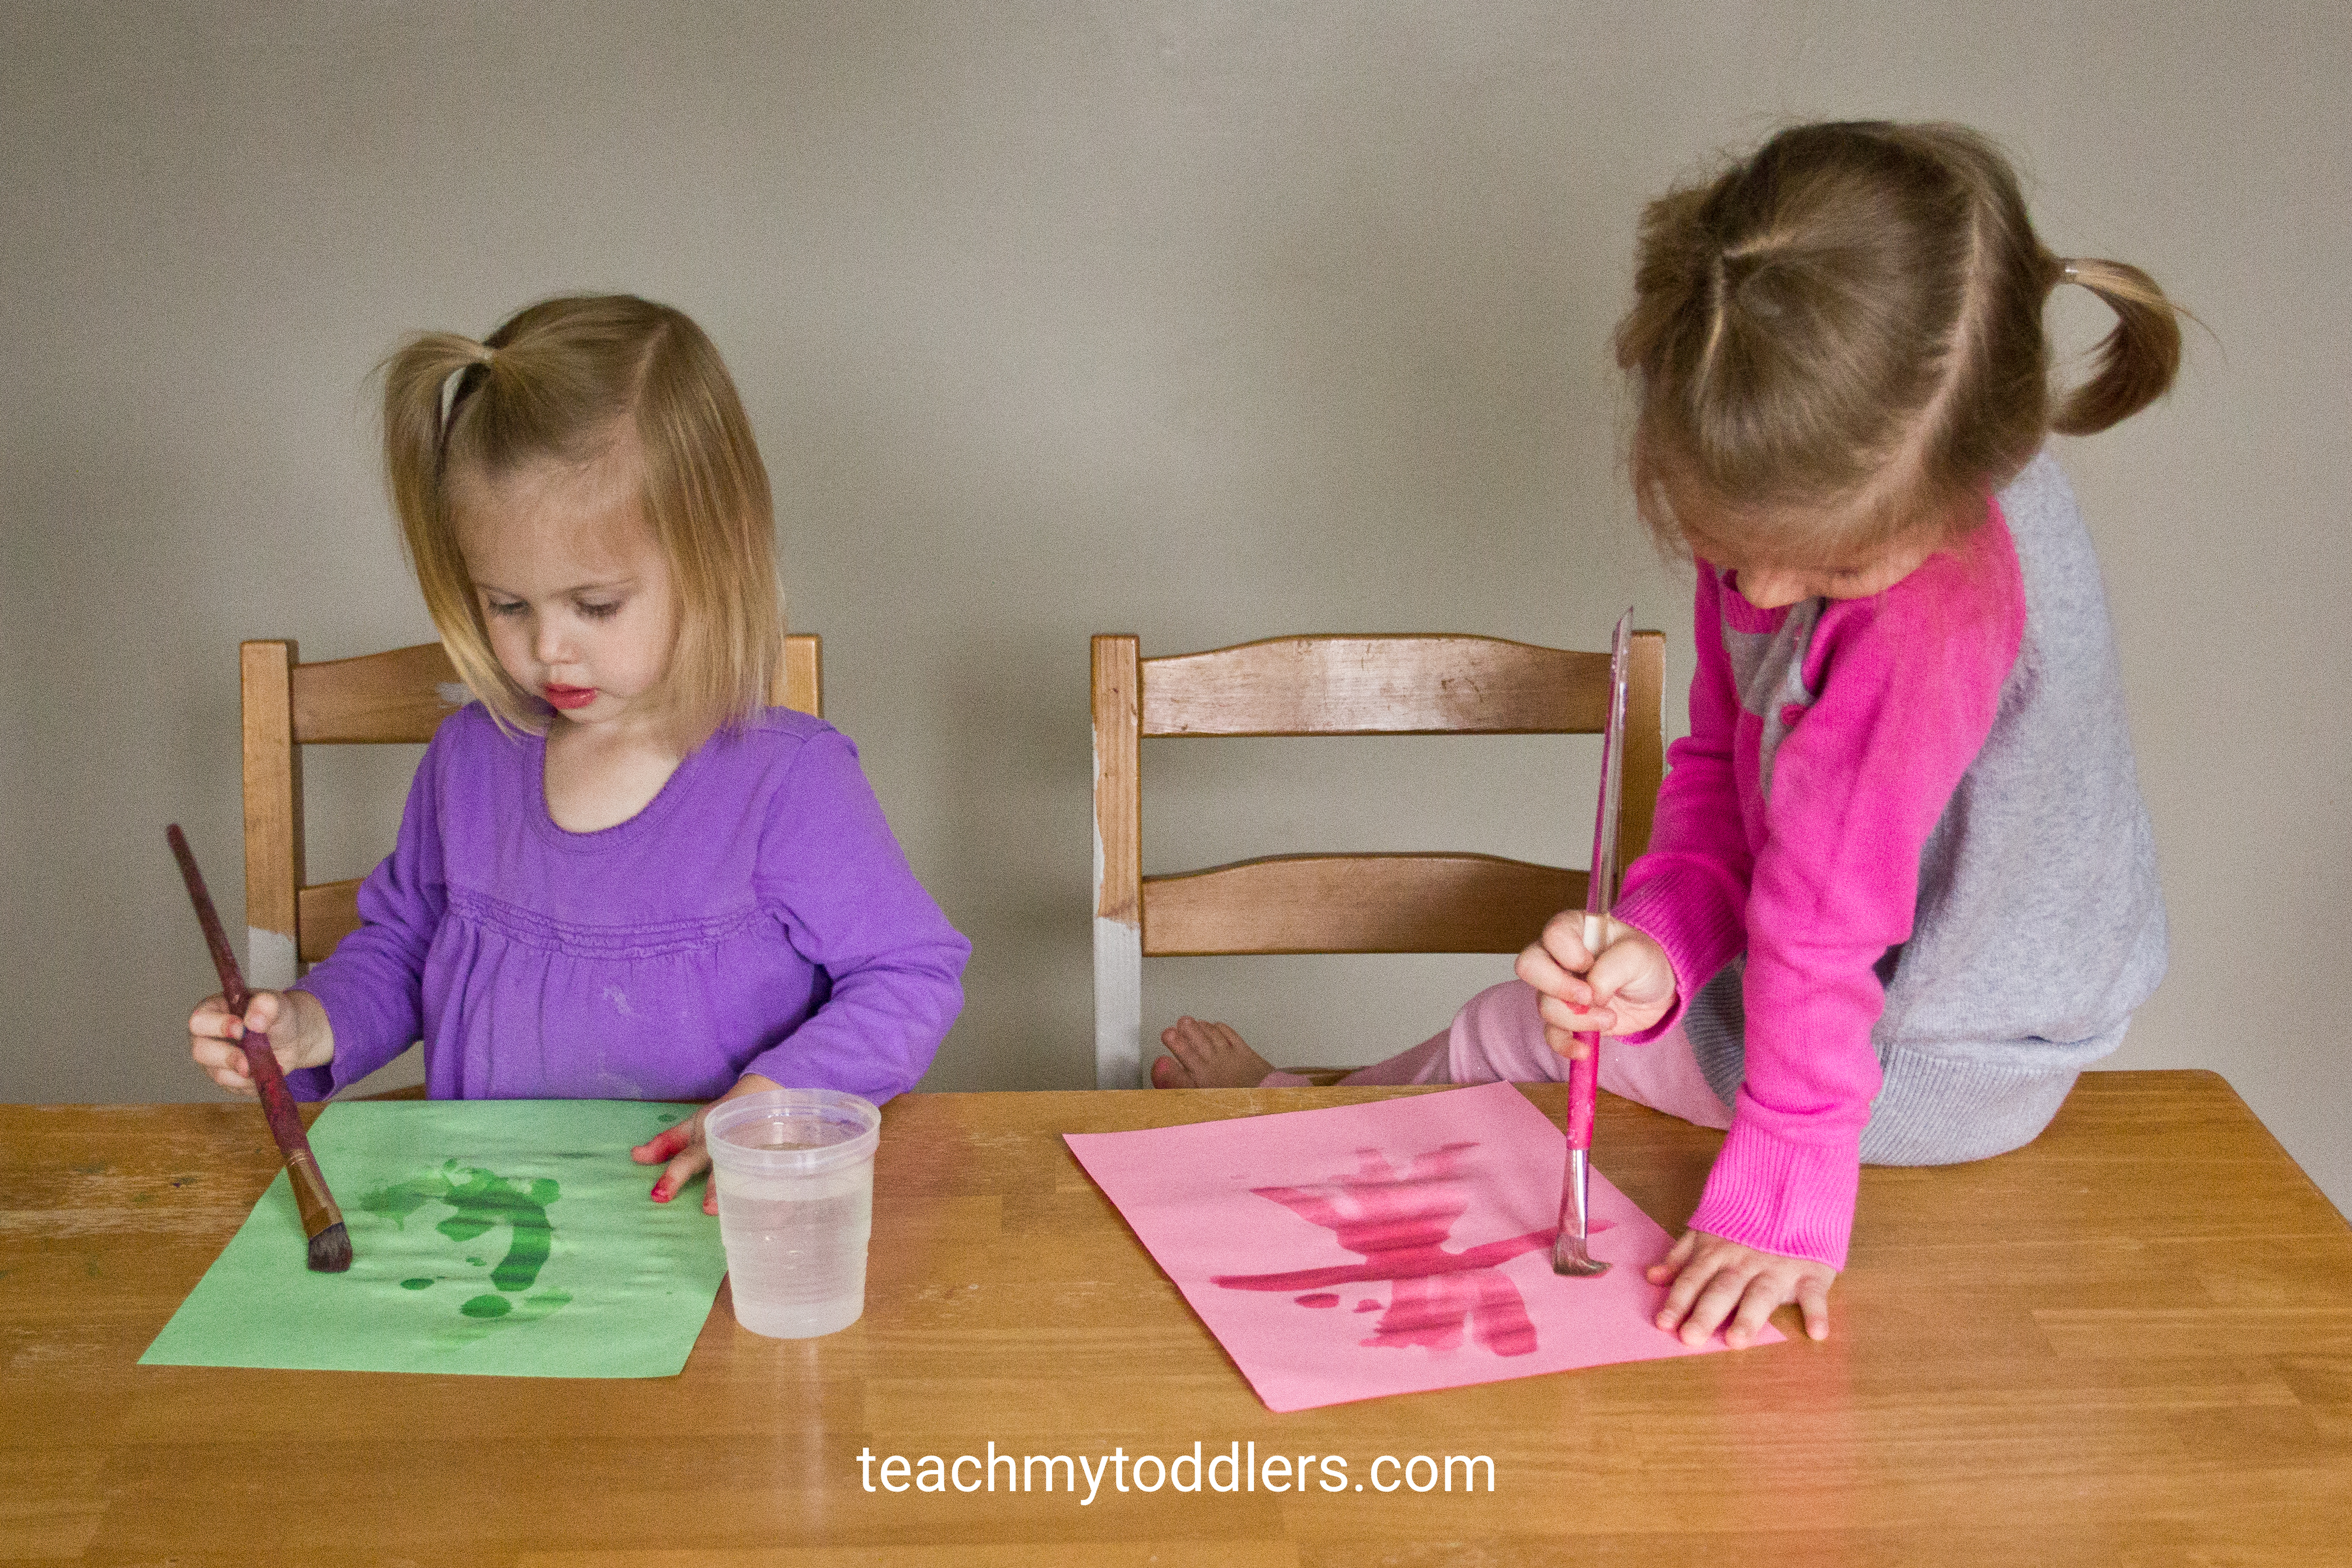 Exciting activity for your toddlers using paper and water for painting during general conference